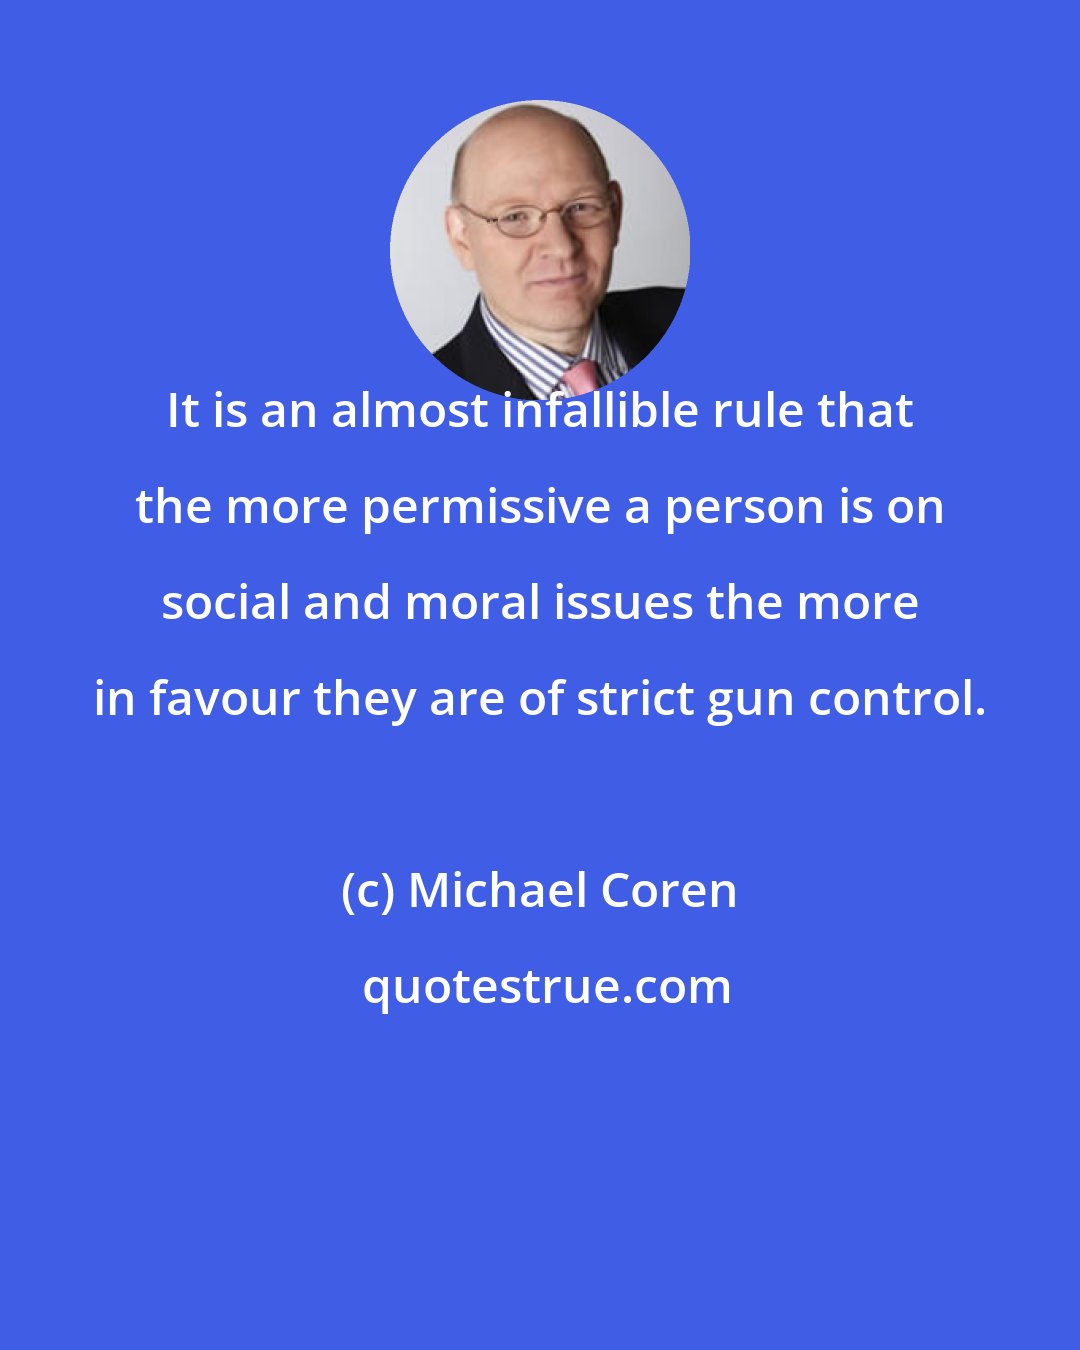 Michael Coren: It is an almost infallible rule that the more permissive a person is on social and moral issues the more in favour they are of strict gun control.